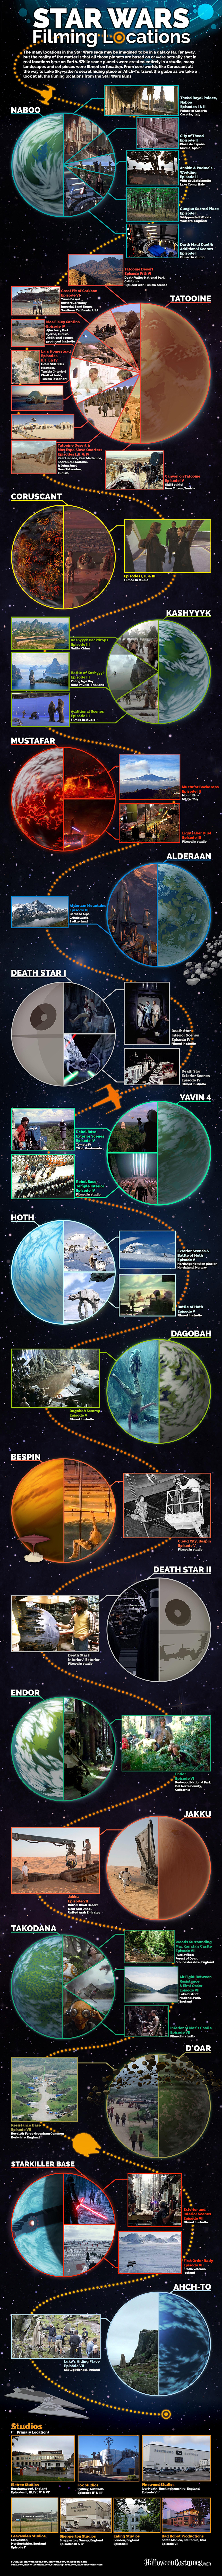 Star-Wars-Filming-Locations-Infographic.jpg